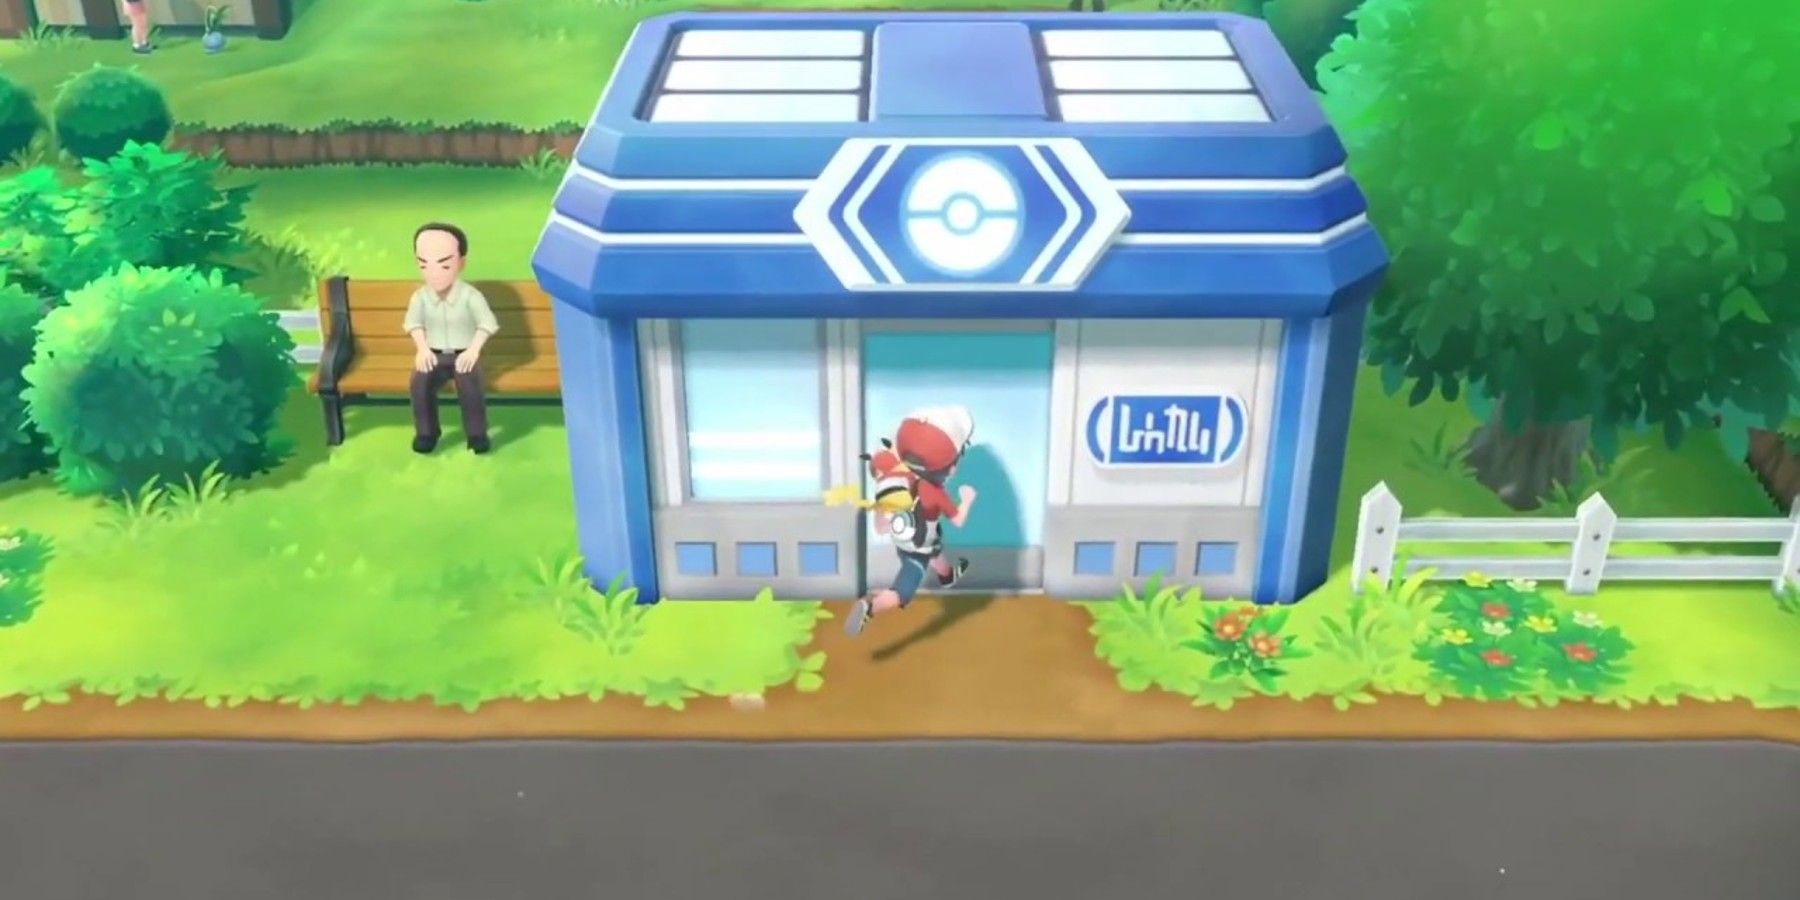 Pokemon Fan Plays Poke Mart Theme at Their Covenience Store to Boost Work Ethic